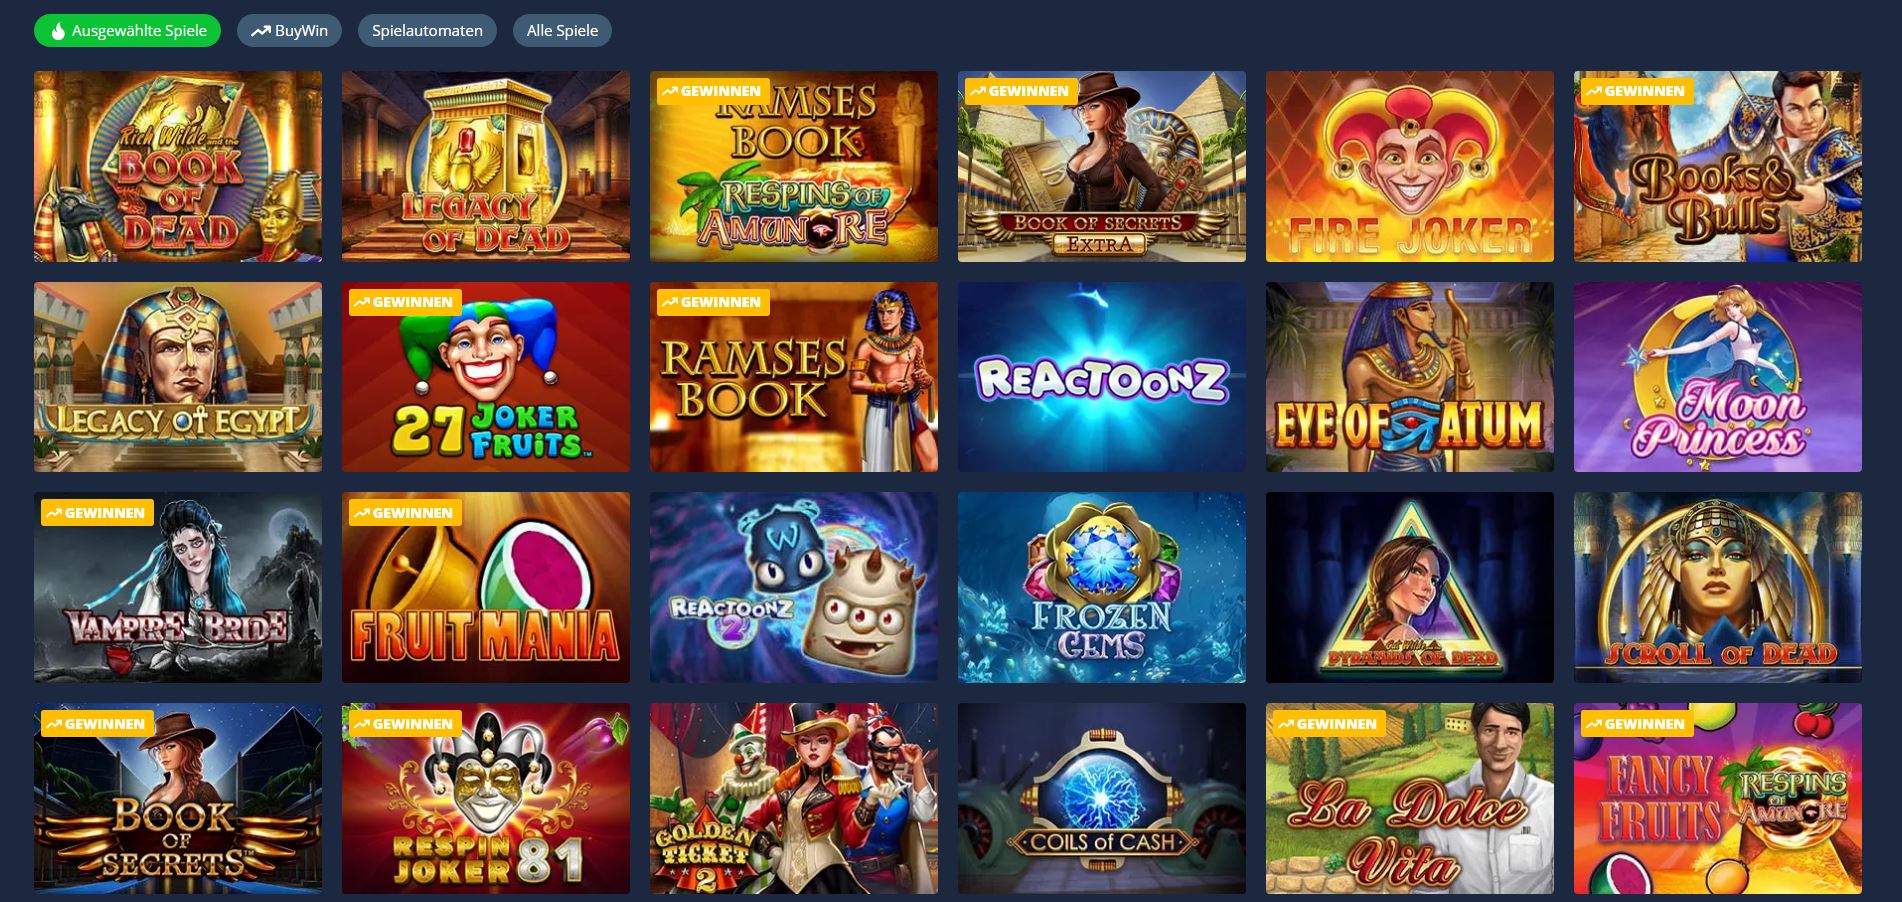 Luckland Casino Spielauswahl